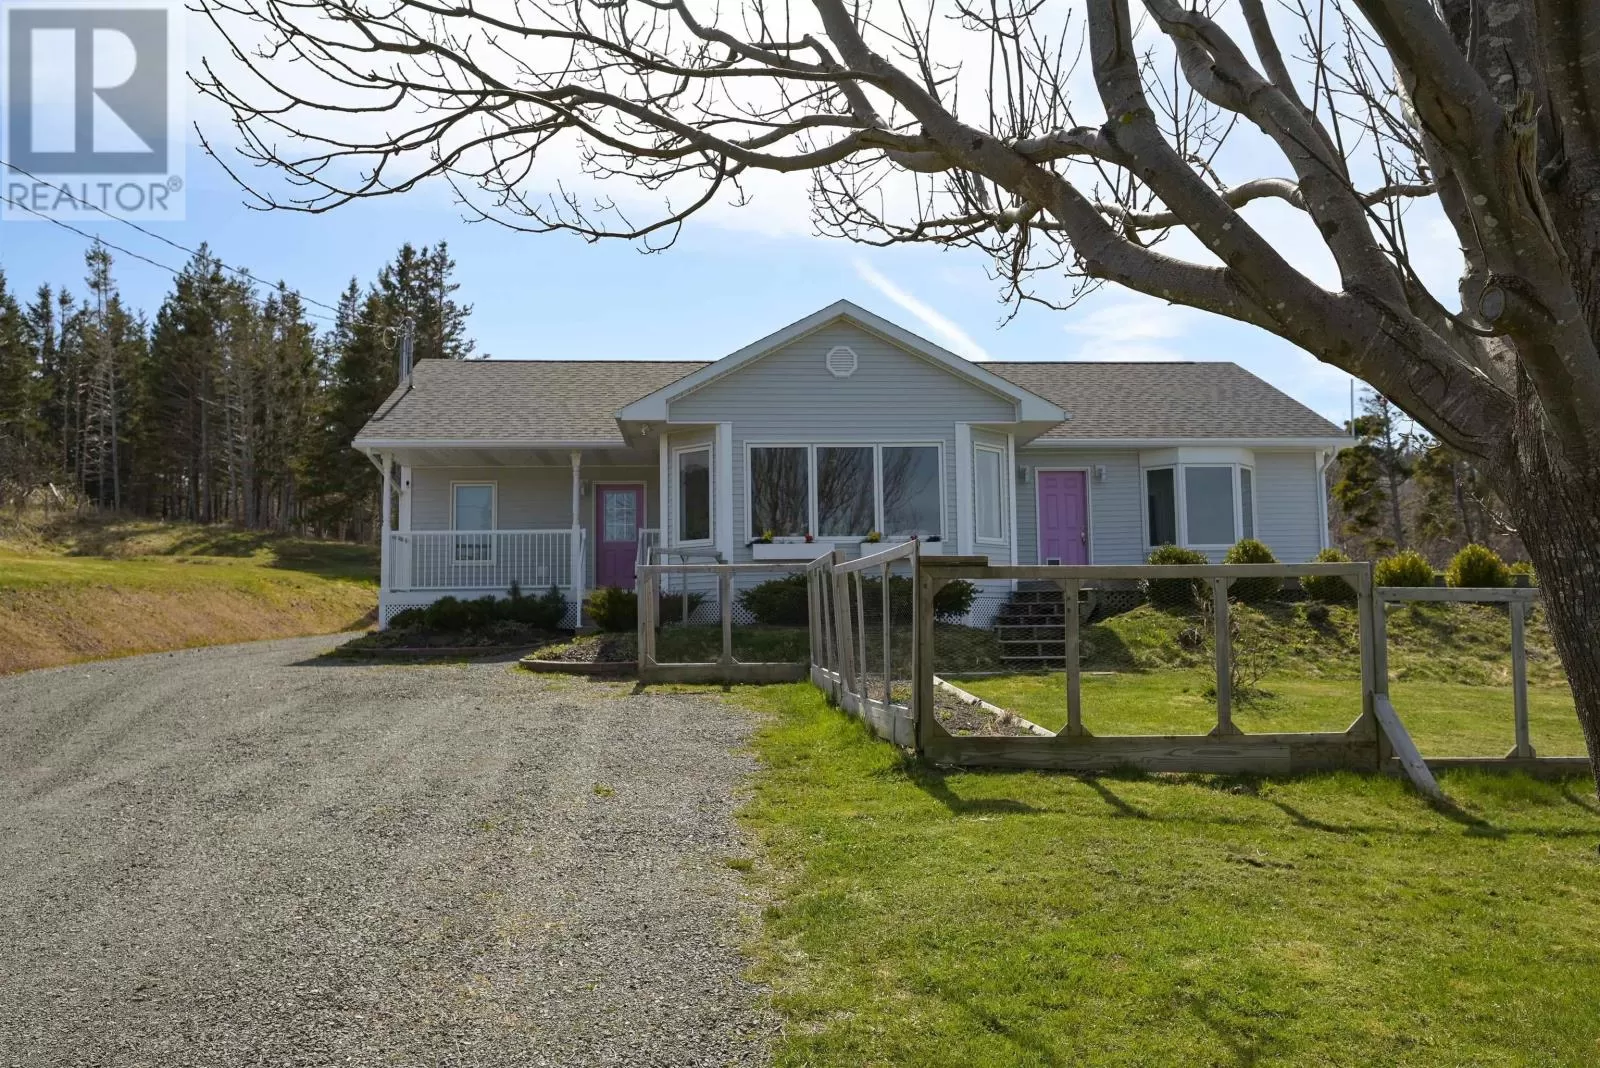 House for rent: 7067 Highway 337, Cape George Point, Nova Scotia B2G 2L2